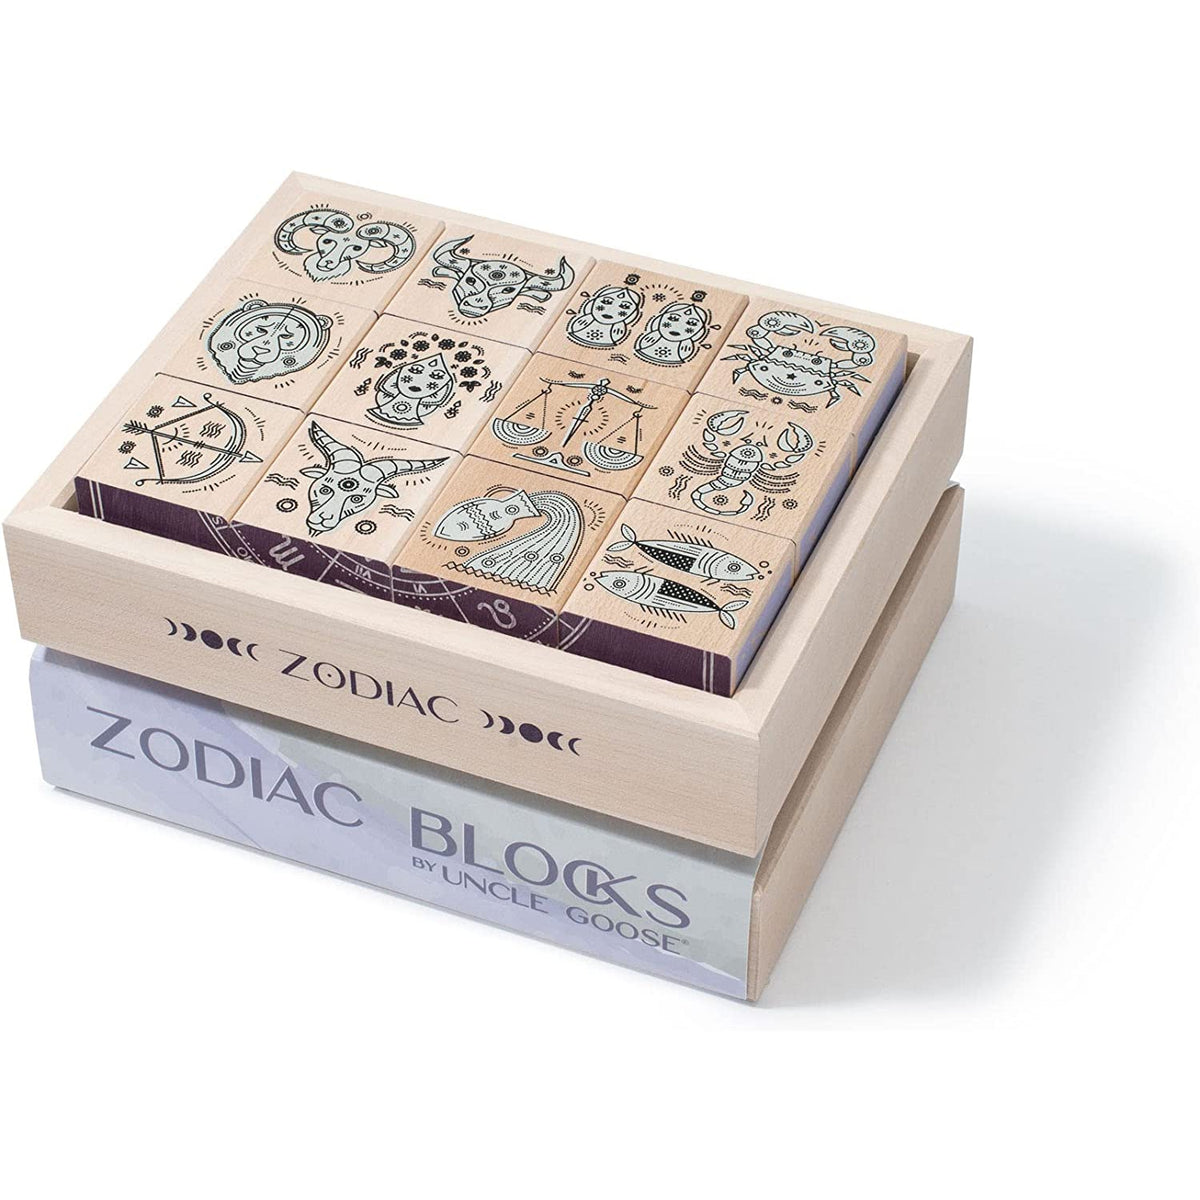 Front up close view of the Zodiac signs with packaging sleeve off and one stacked on another to show the designs on the blocks.